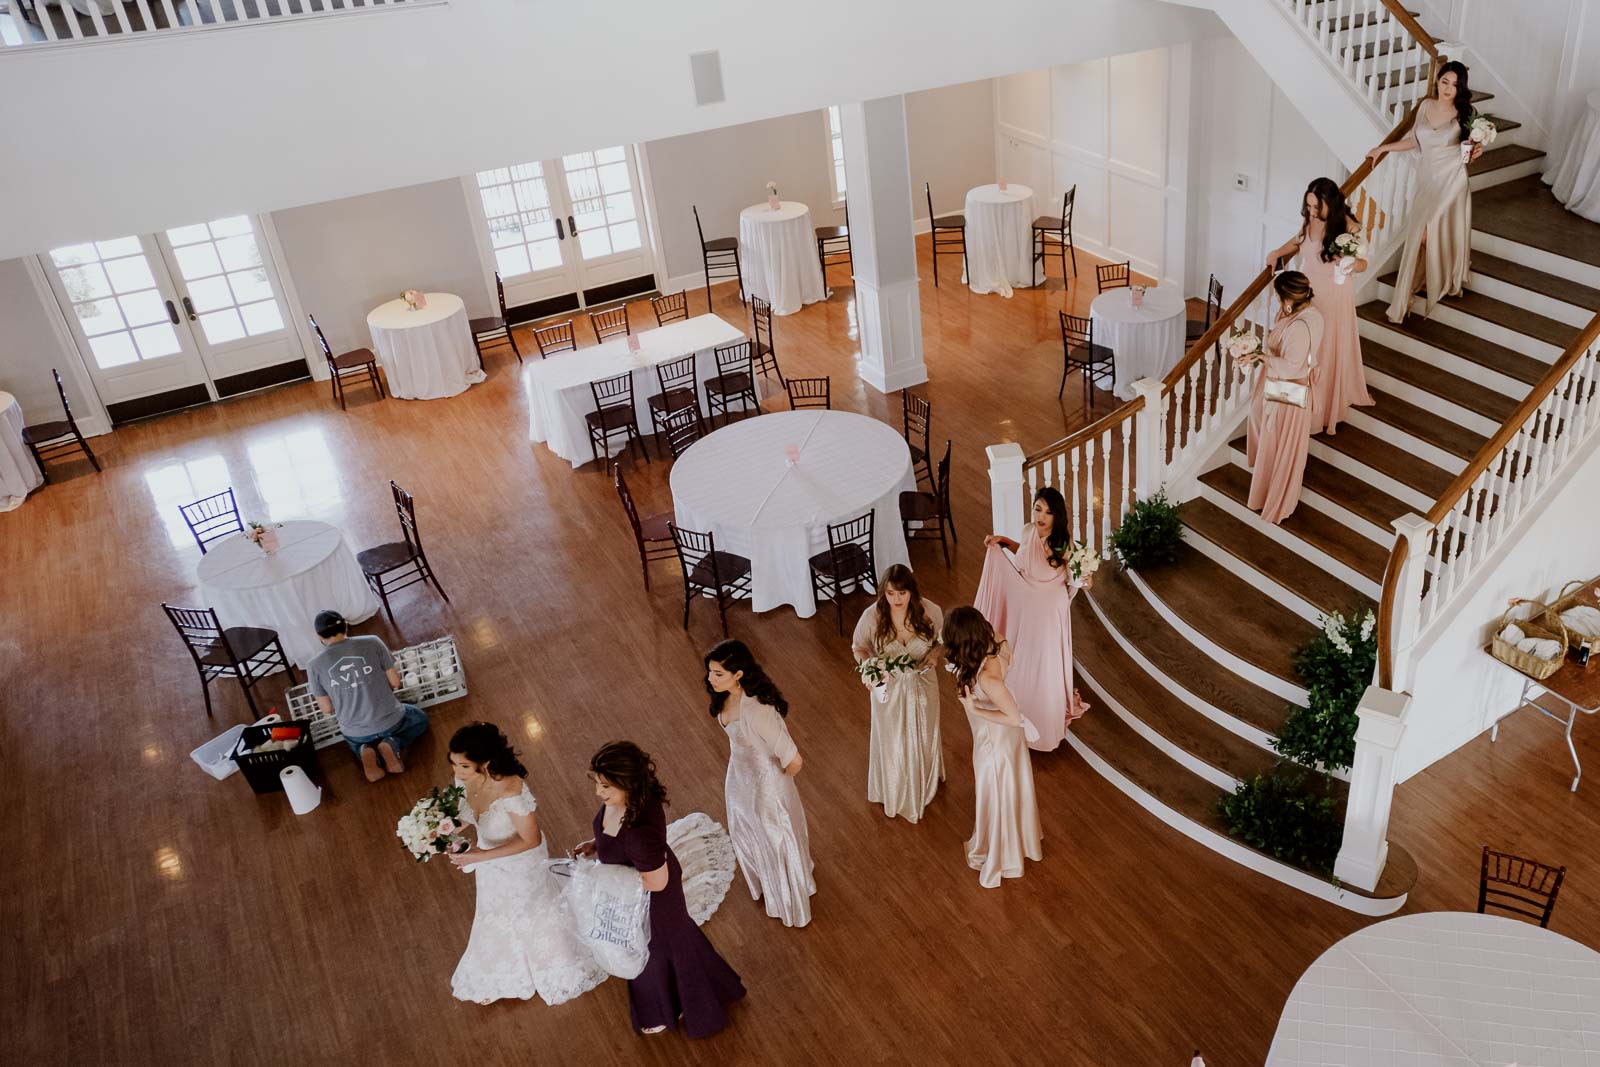 A wide angle view at Kendall point as the Bride leads the bridesmaids down the staircase